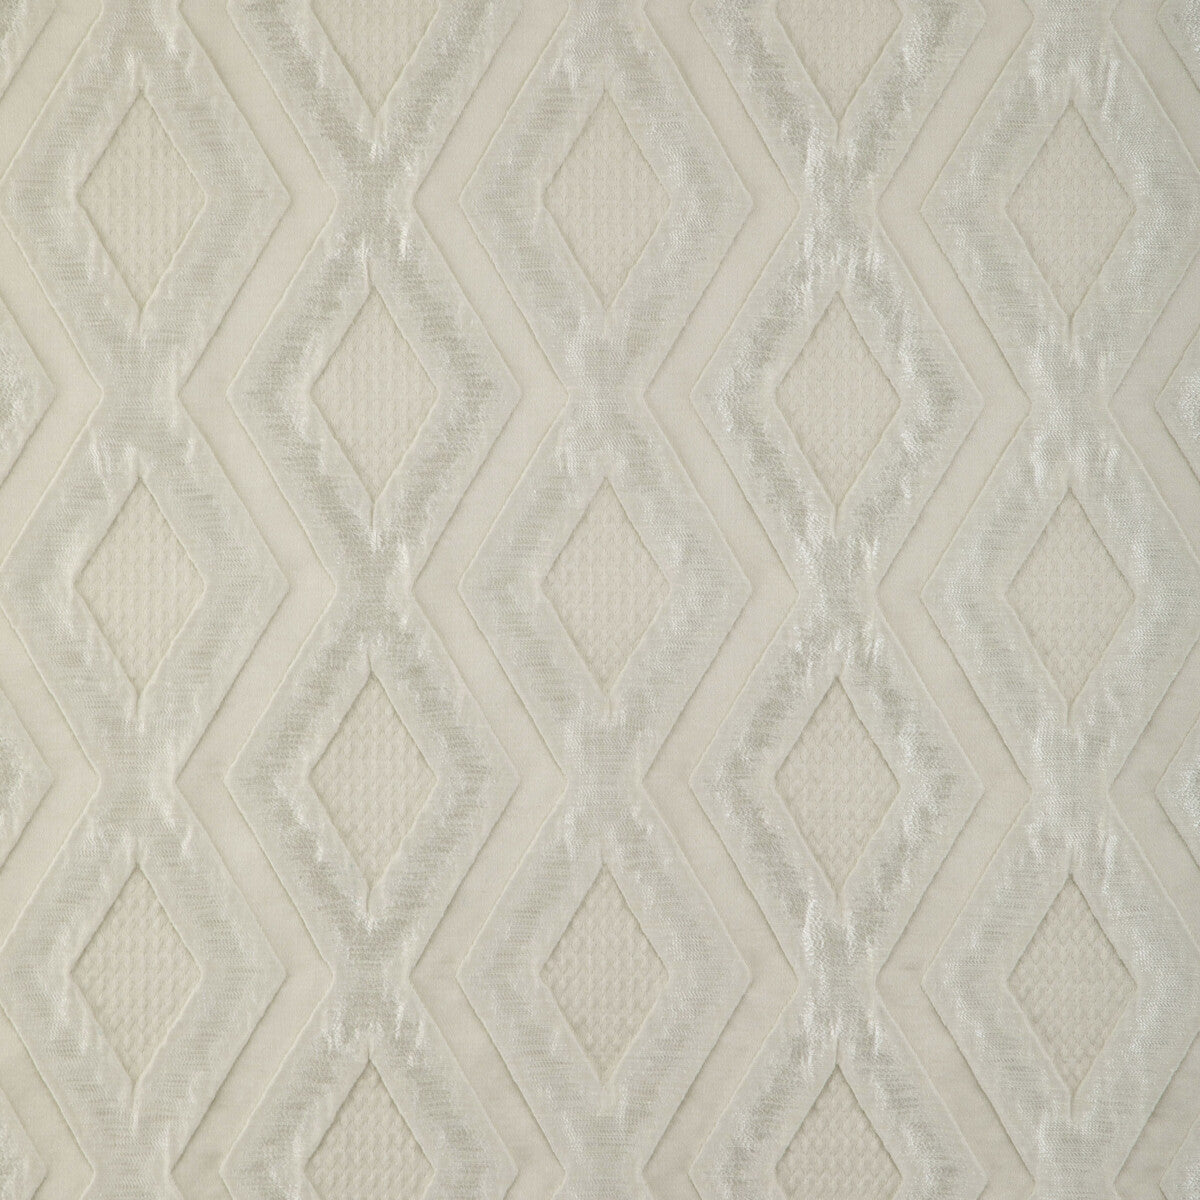 Flawless fabric in cloud color - pattern 36839.106.0 - by Kravet Design in the Candice Olson collection